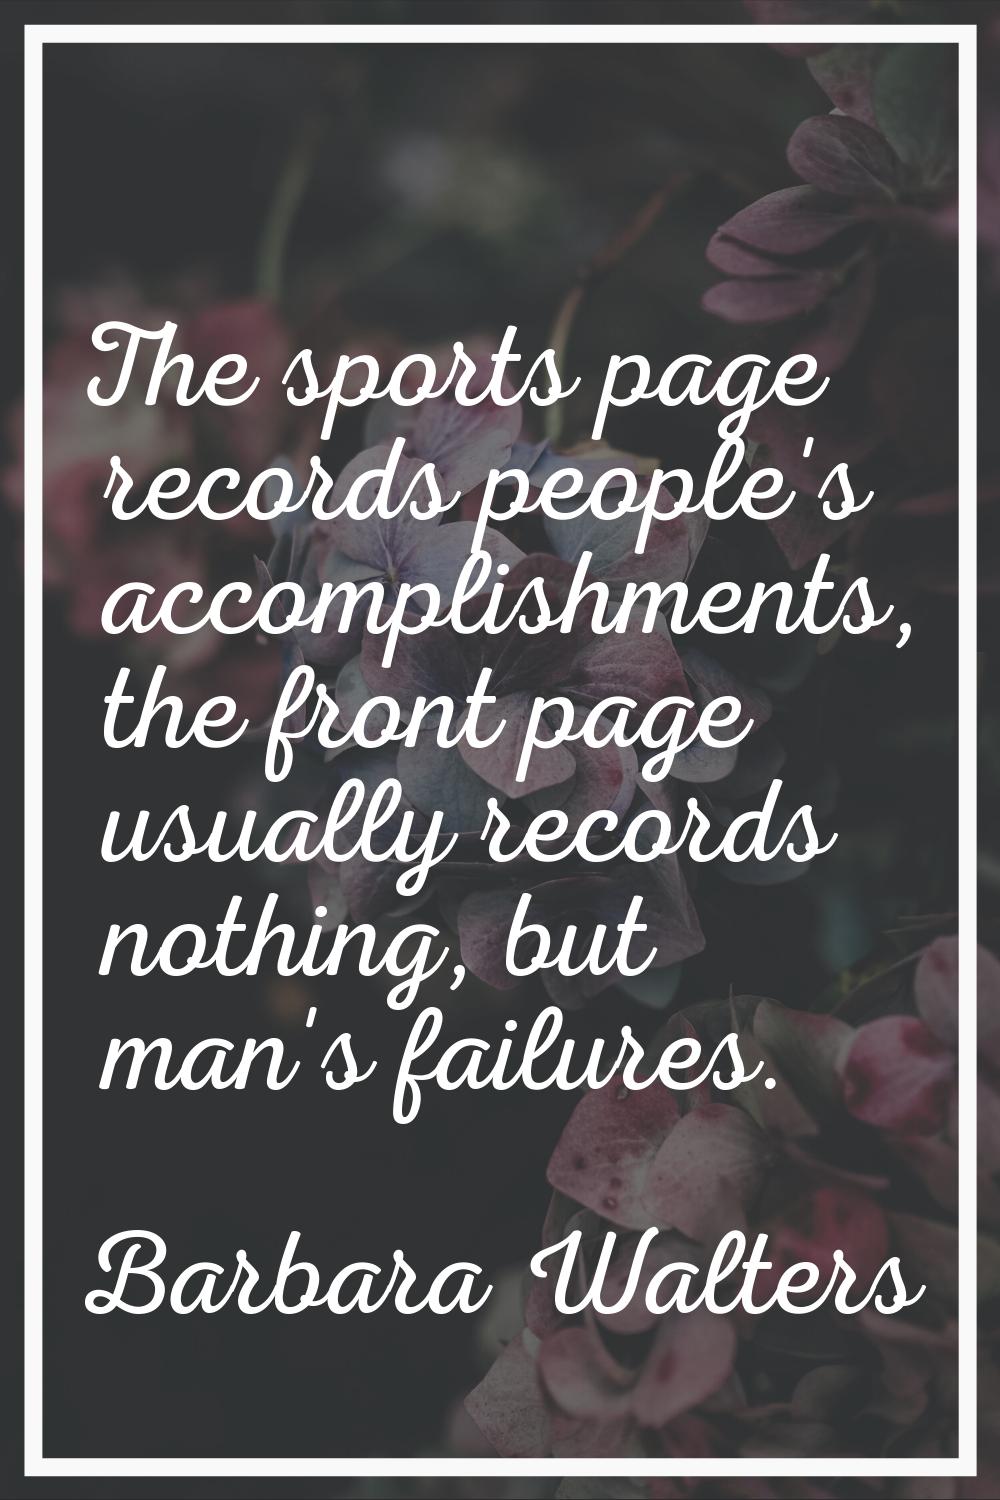 The sports page records people's accomplishments, the front page usually records nothing, but man's